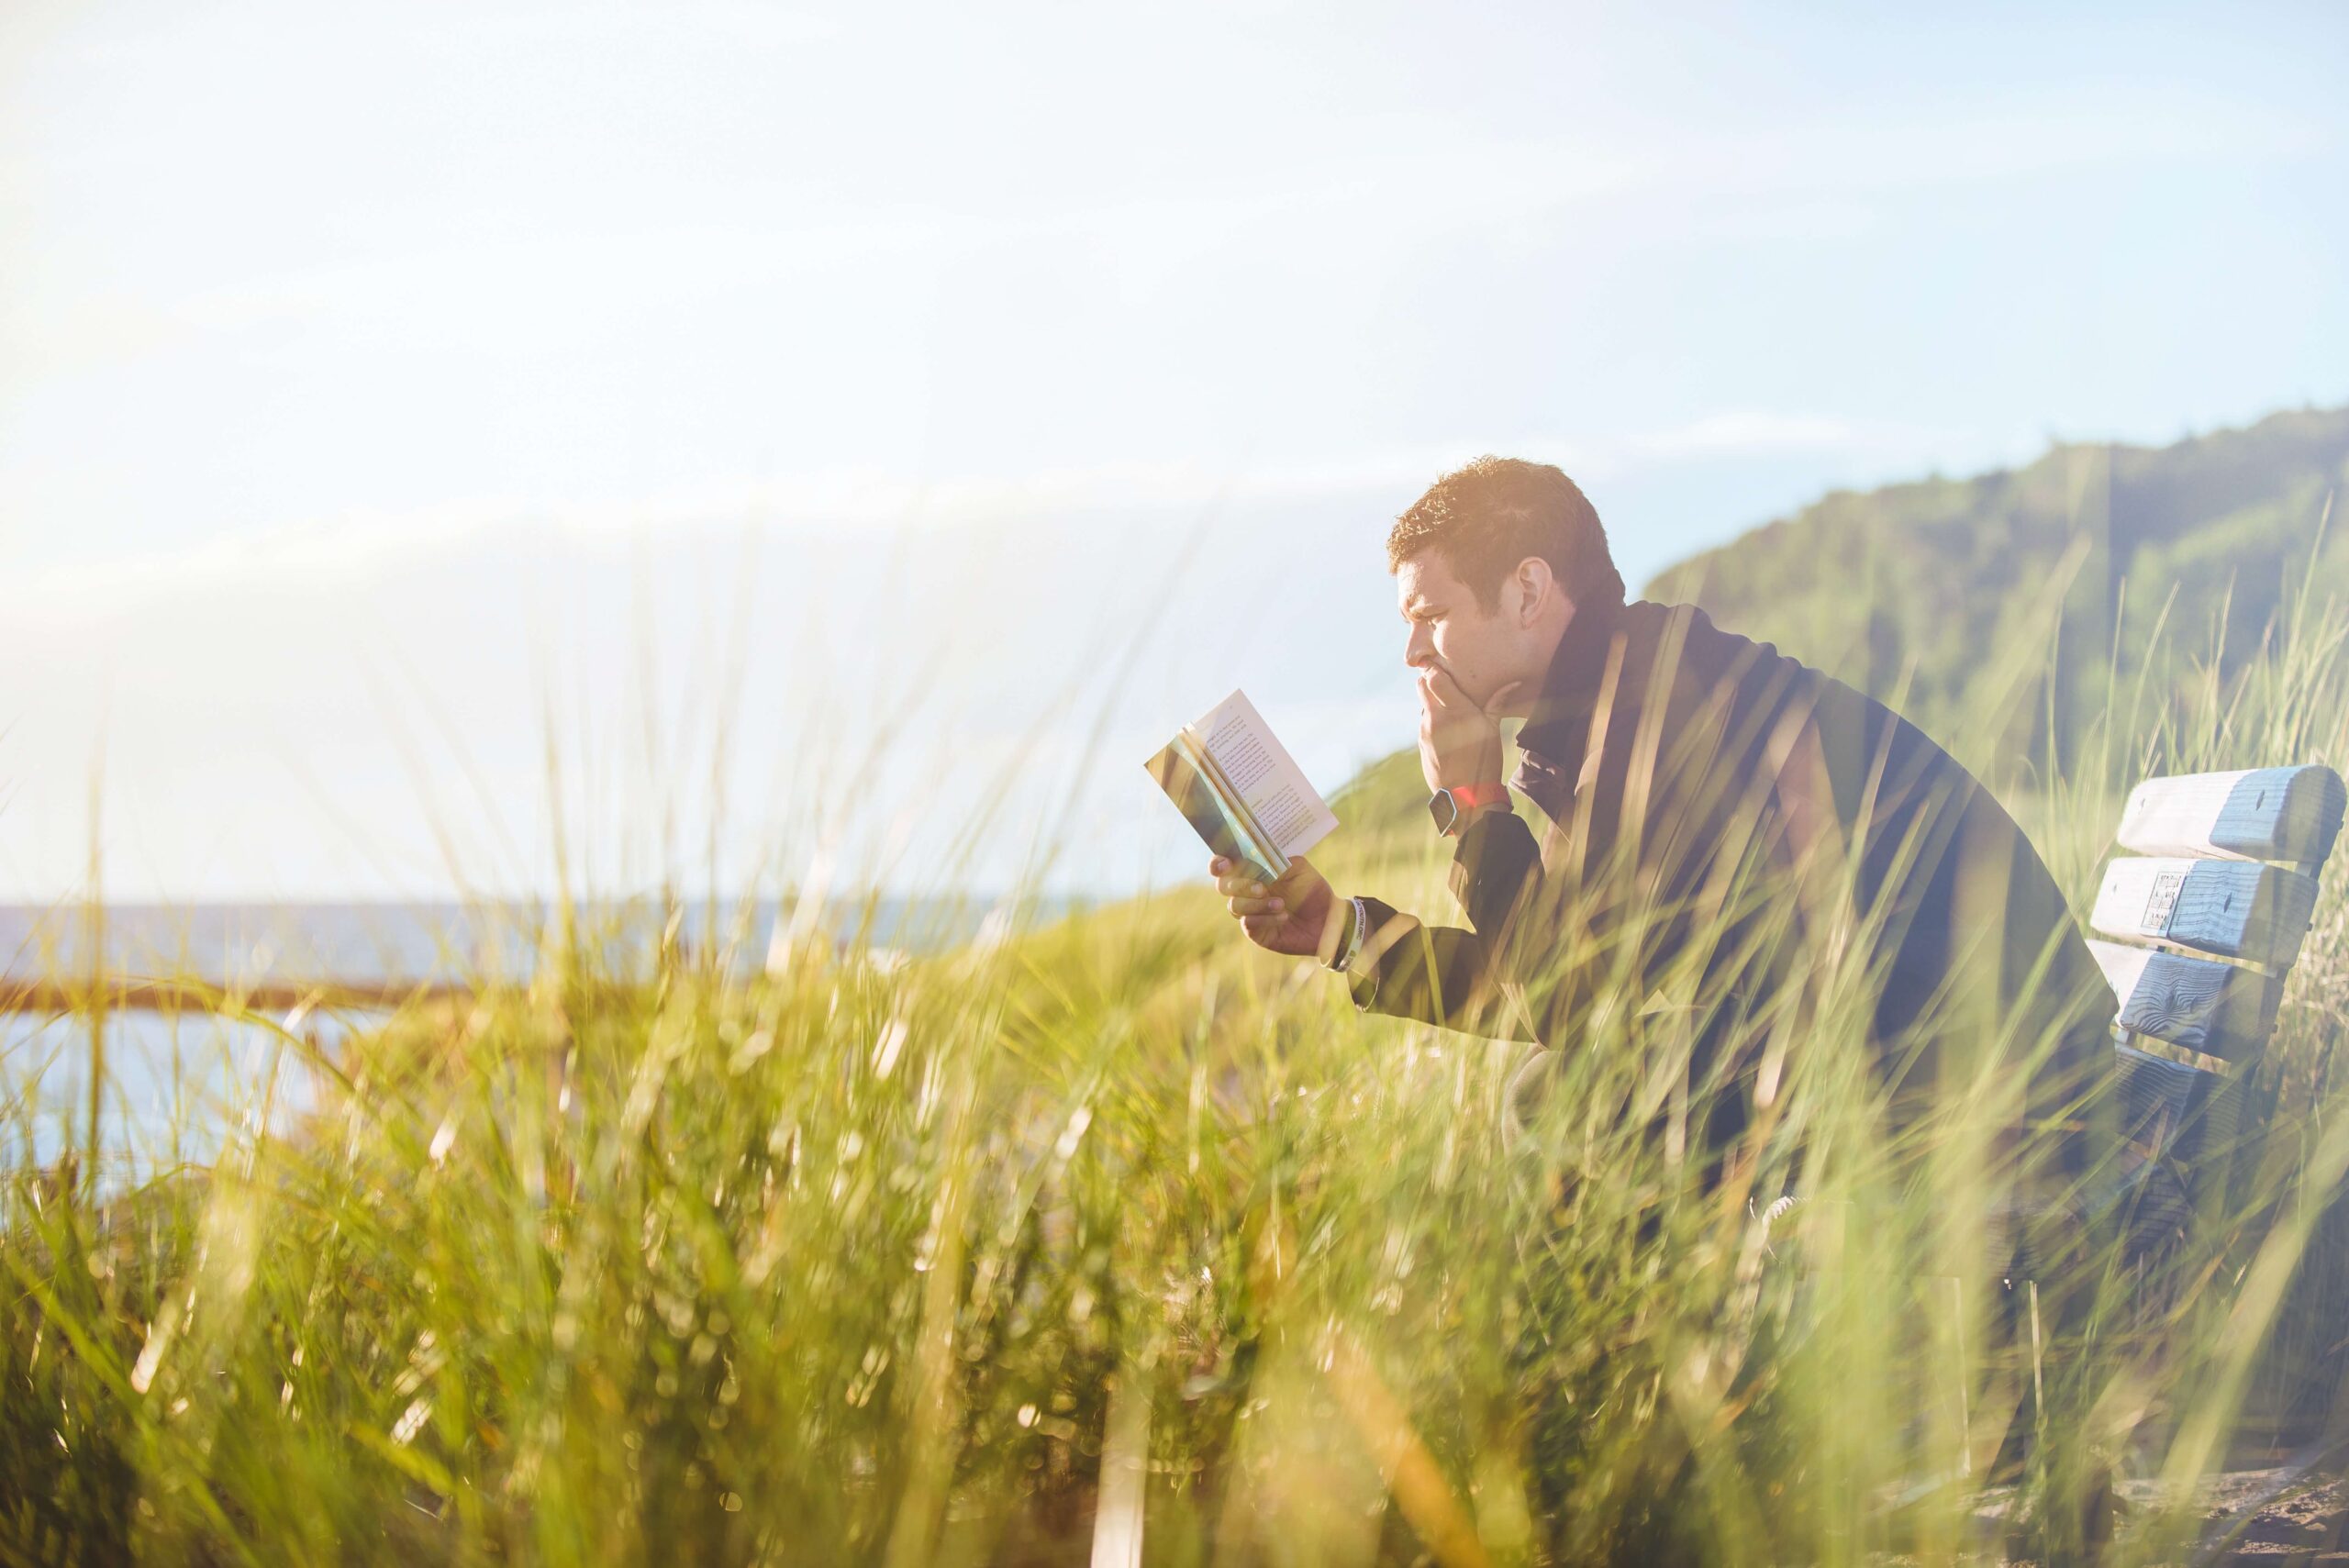 A man sitting on a bench in tall grass, facing the water, reading a book